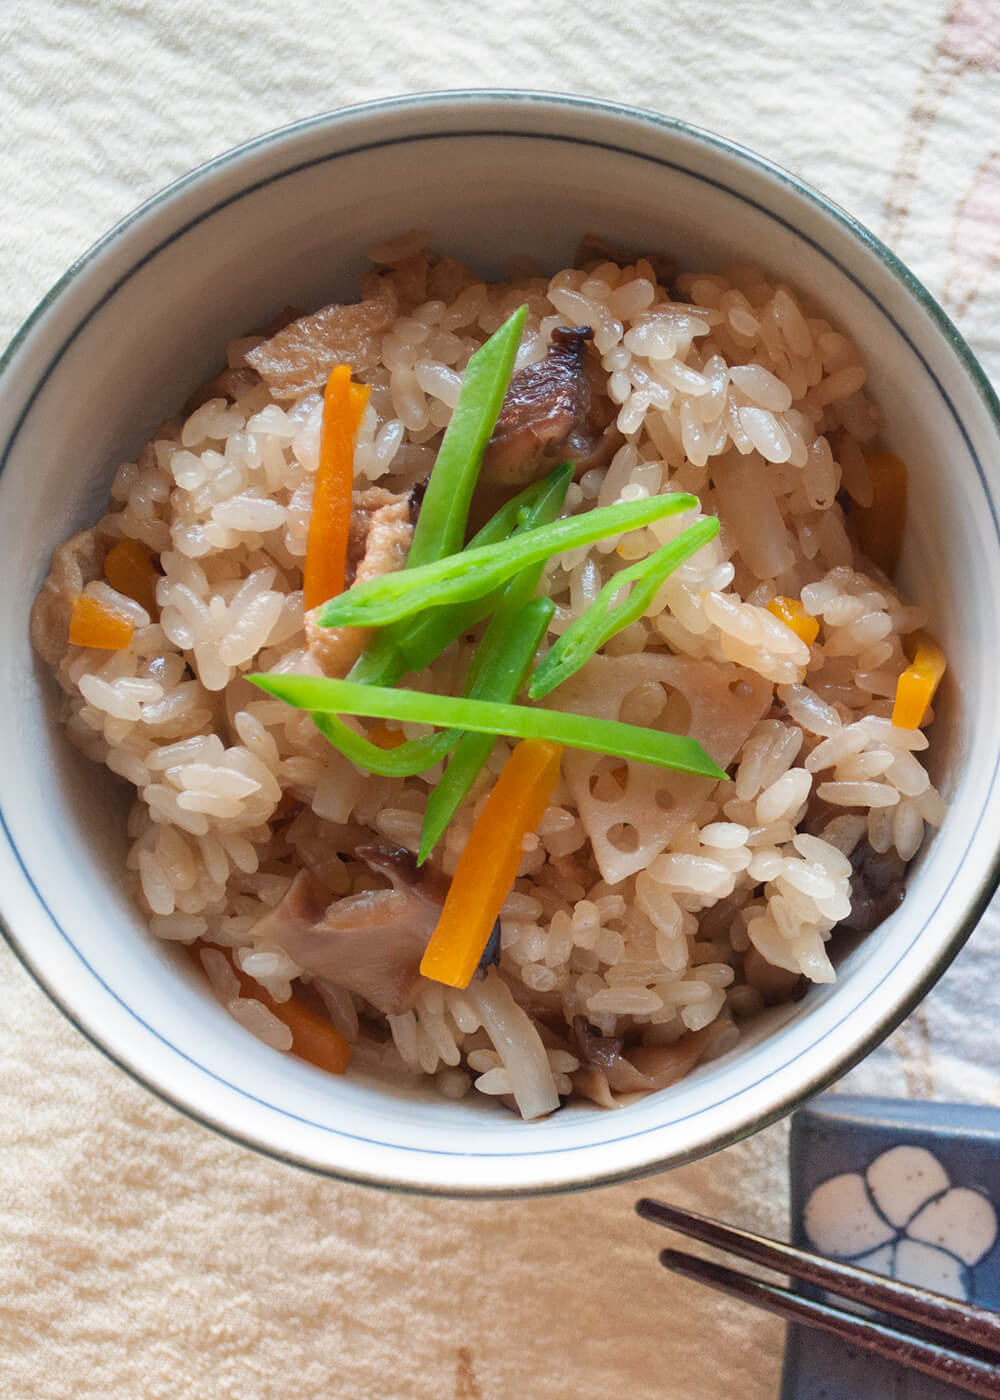 Gomoku Gohan (Japanese Mixed Rice) is rice cooked in seasoned dashi stock with 5 vegetables. You can almost eat the rice by itself without any other dishes!